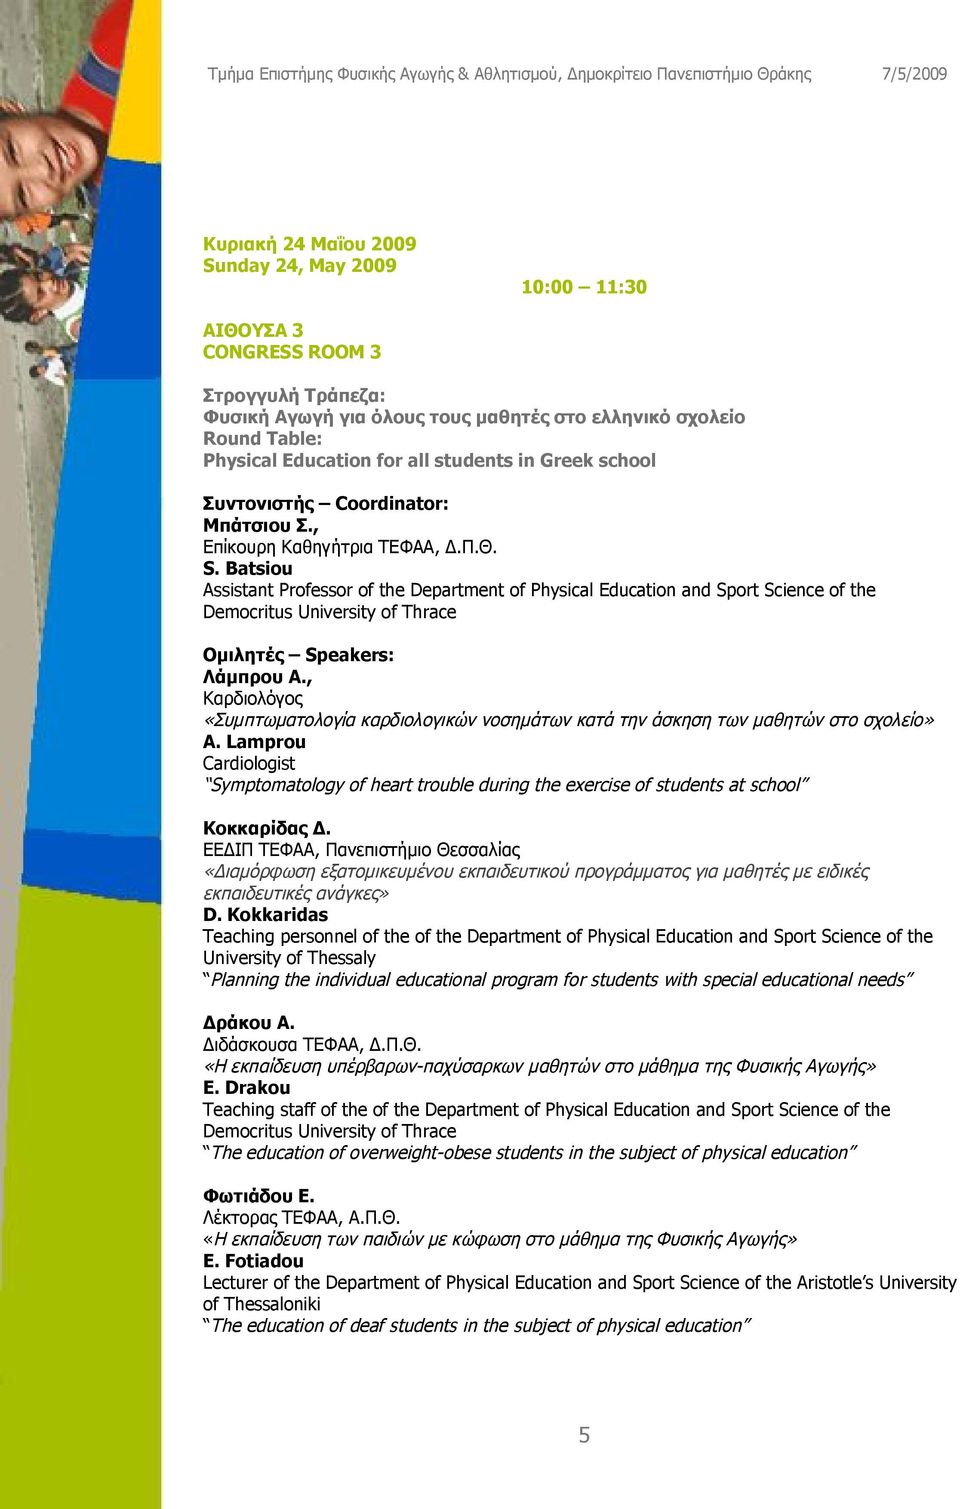 Batsiou Assistant Professor of the Department of Physical Education and Sport Science of the Democritus University of Thrace Ομιλητές Speakers: Λάμπρου Α.